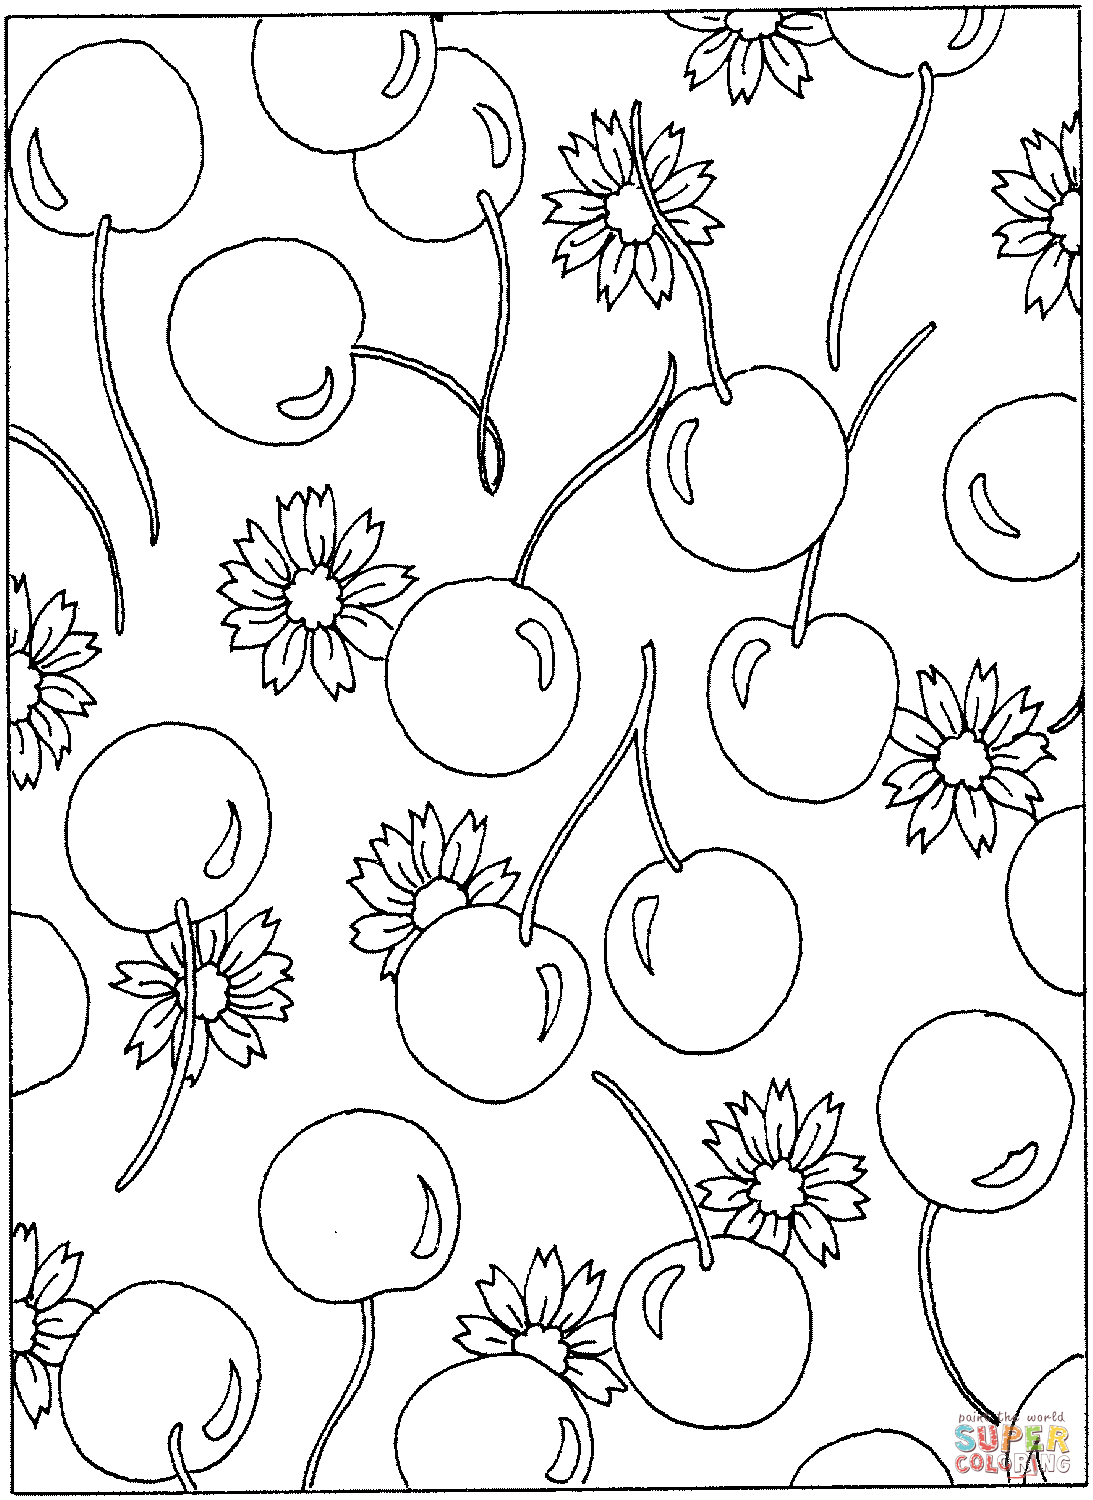 Cherry Blossom Coloring Page - Coloring Home